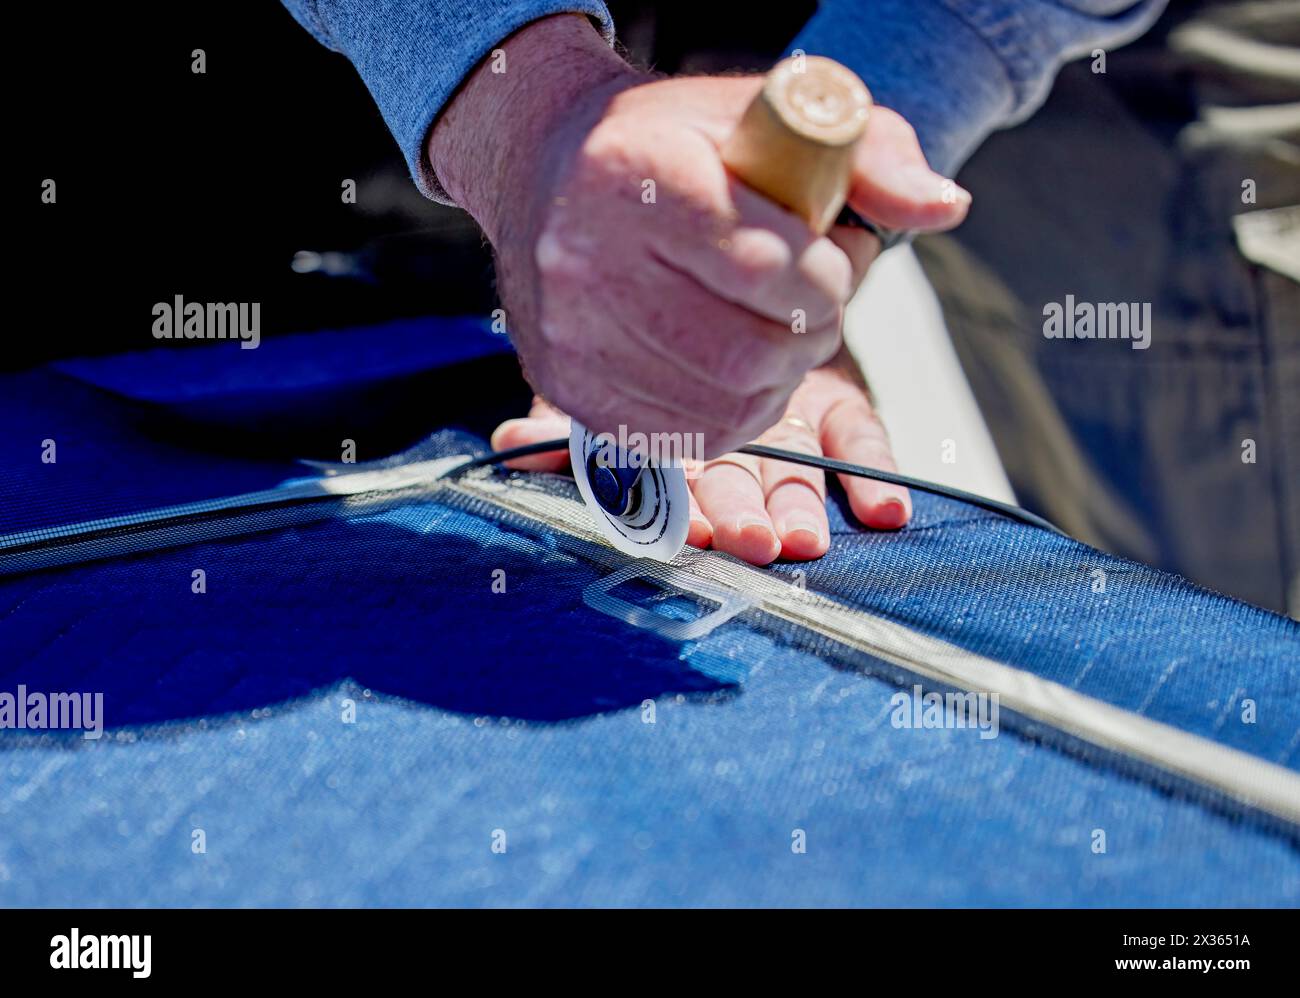 Close up the hands of a man holding a screen roller replacing a window screen into a window frame Stock Photo